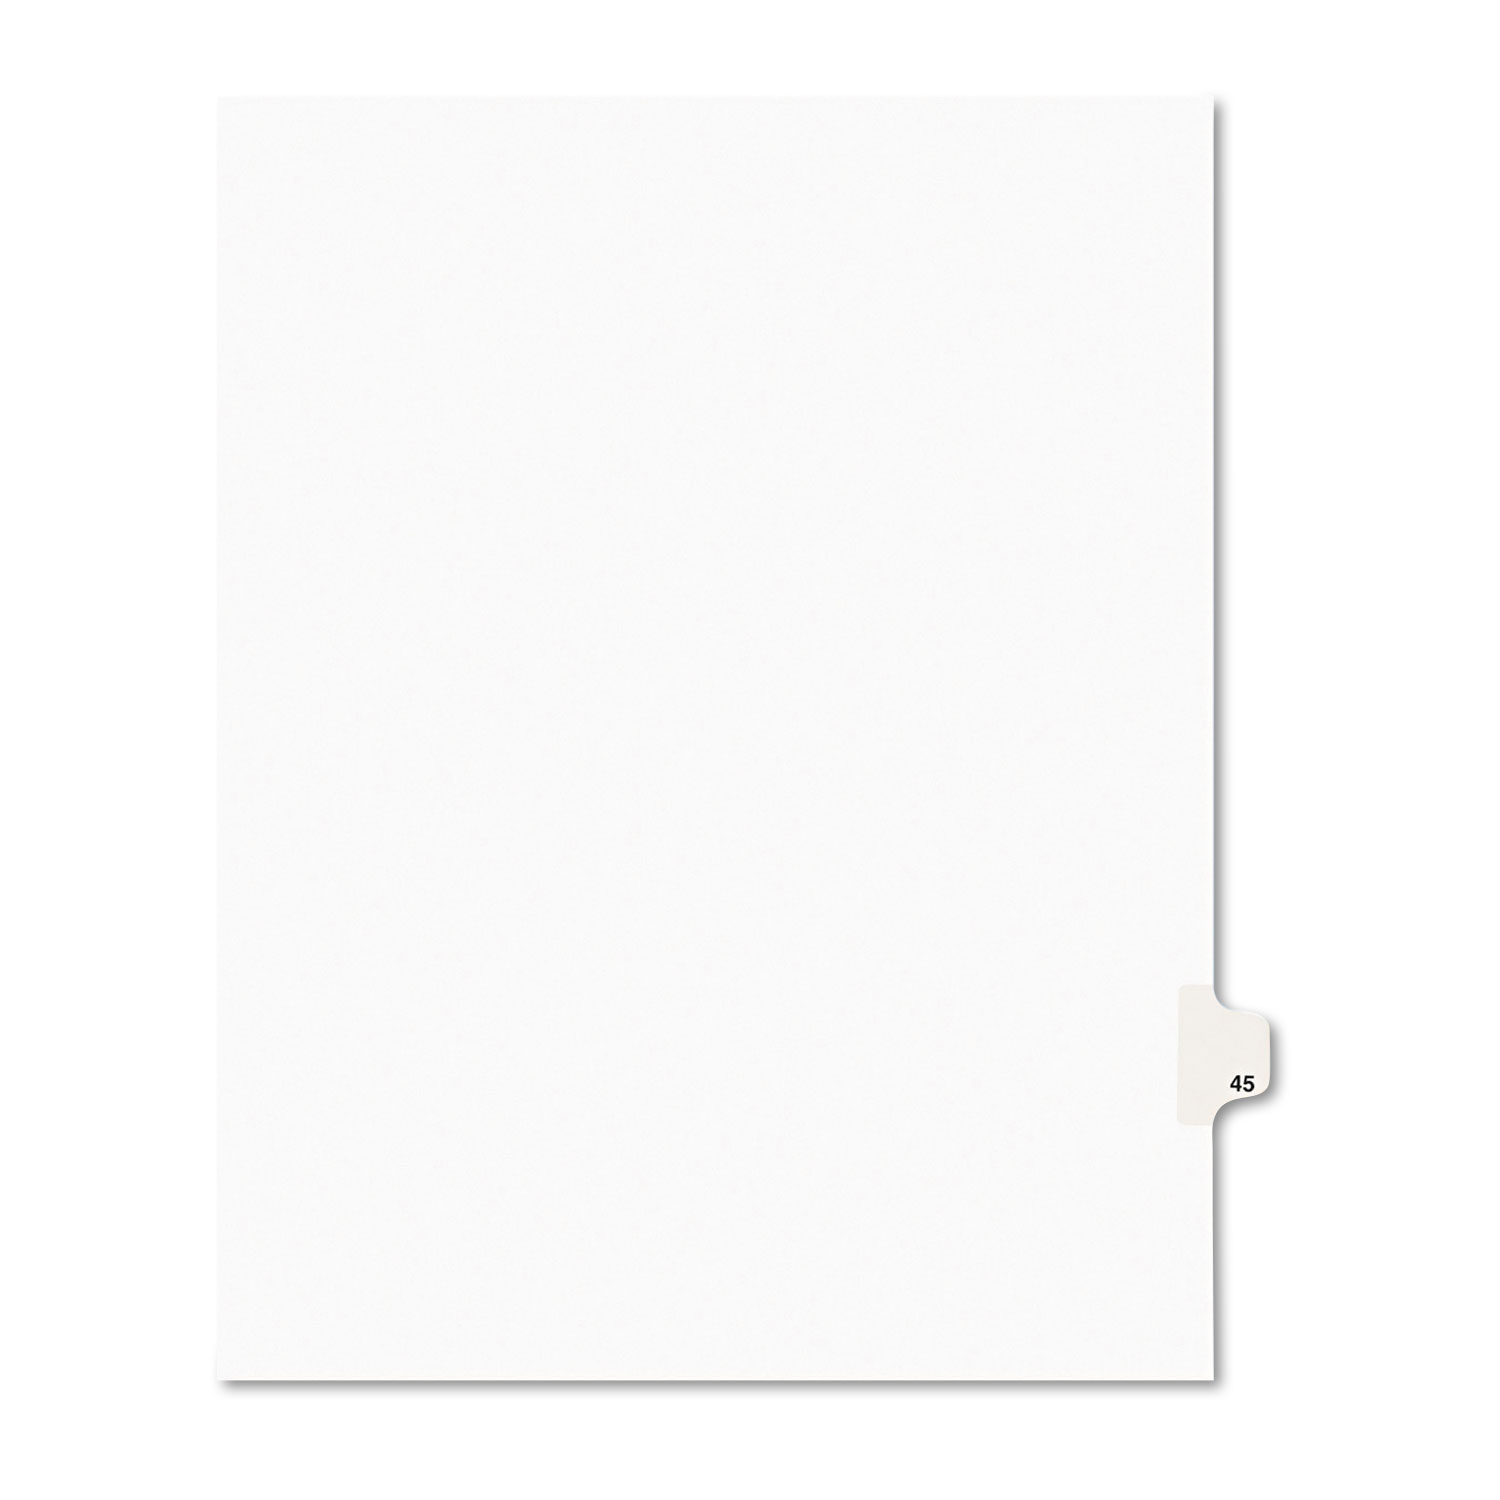  Avery 01045 Preprinted Legal Exhibit Side Tab Index Dividers, Avery Style, 10-Tab, 45, 11 x 8.5, White, 25/Pack (AVE01045) 